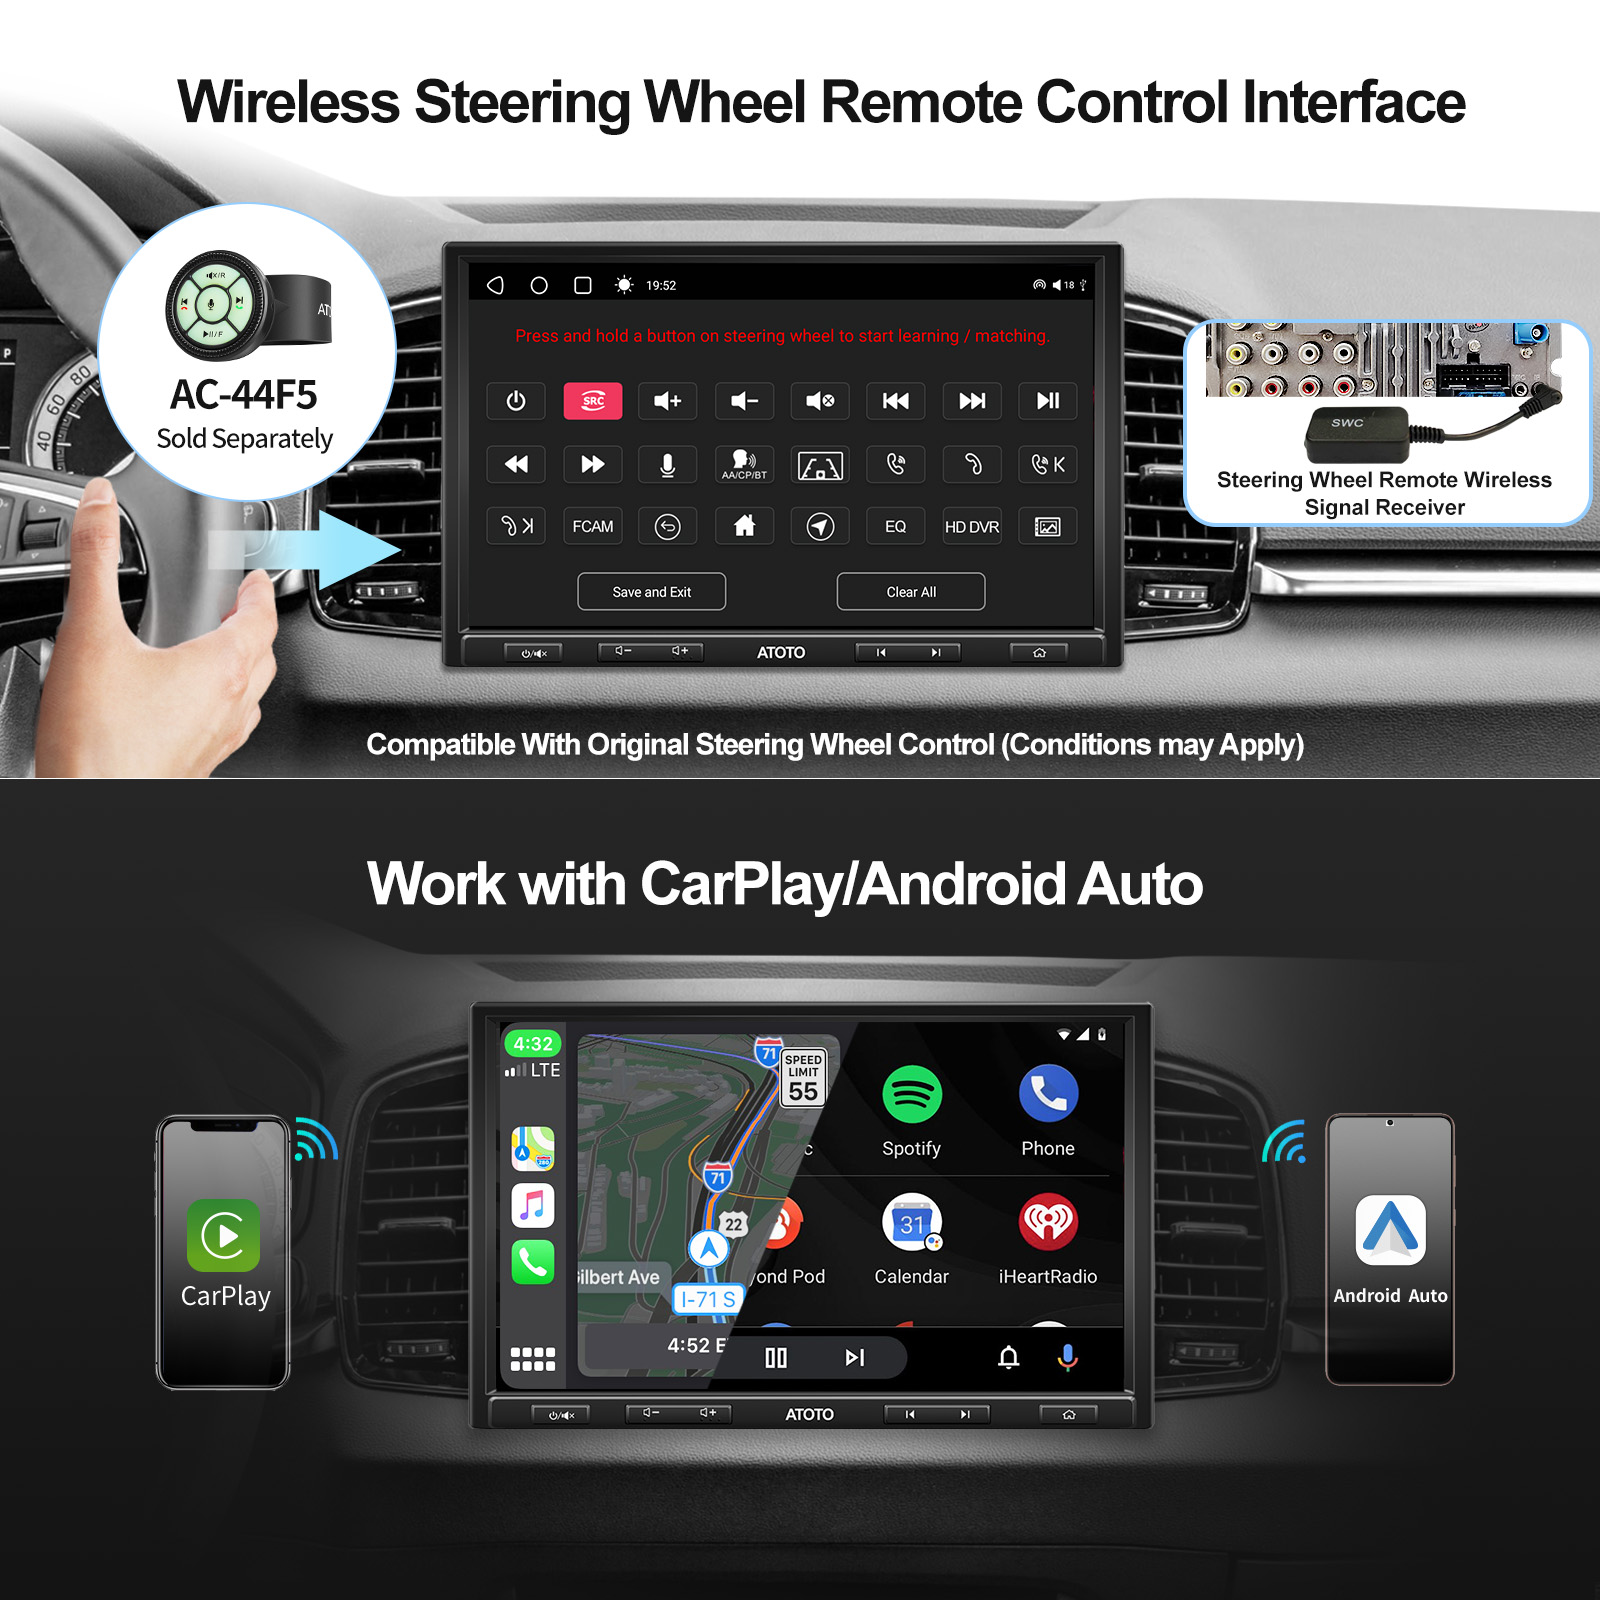 Onlinecar Stereoatoto S8 Carplay Android Auto Stereo - 10 Inch Double-din  Touch Screen, Universal Fit, 32gb Rom, Built-in Gps, Steering Control